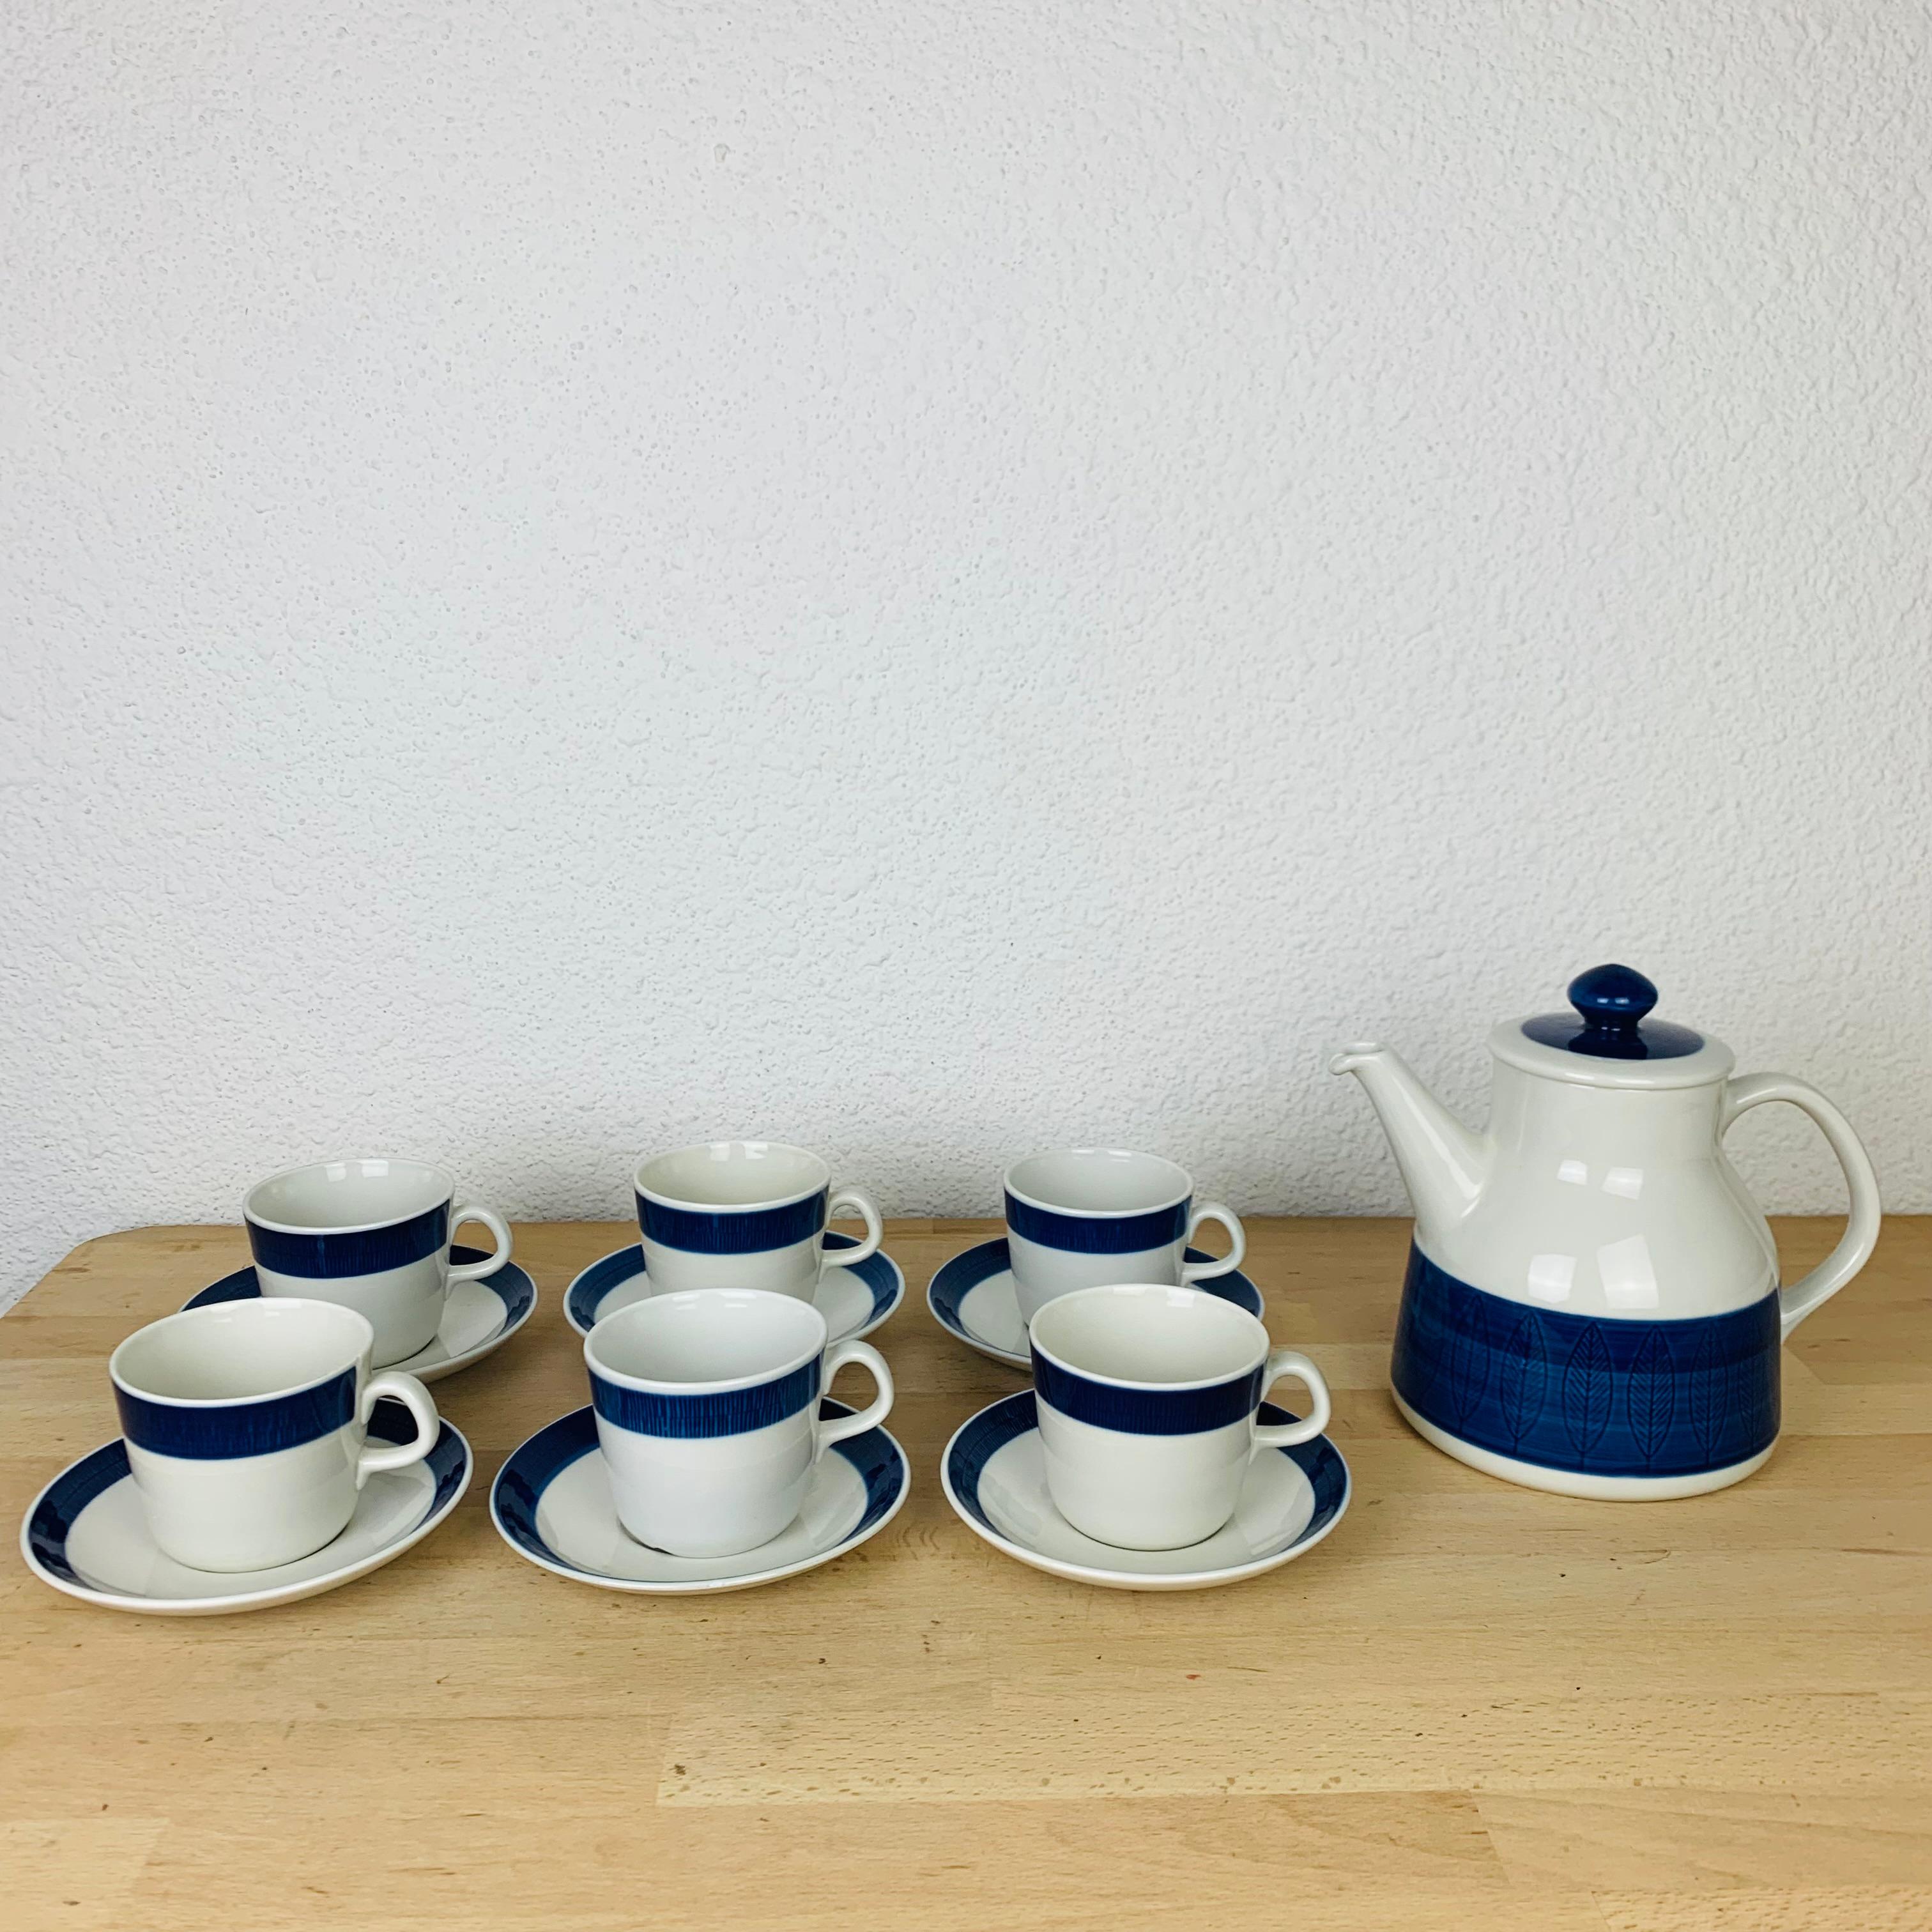 Koka tea set by Hertha Bengtson for Rörstrand Sweden, manufactured in the 1960's. This set contains a tea pot, six cups and six saucers. 

Slight wear due to its age and use, no chip, no crack. 

Measurements of the tea pot : height 17 cm, bottom